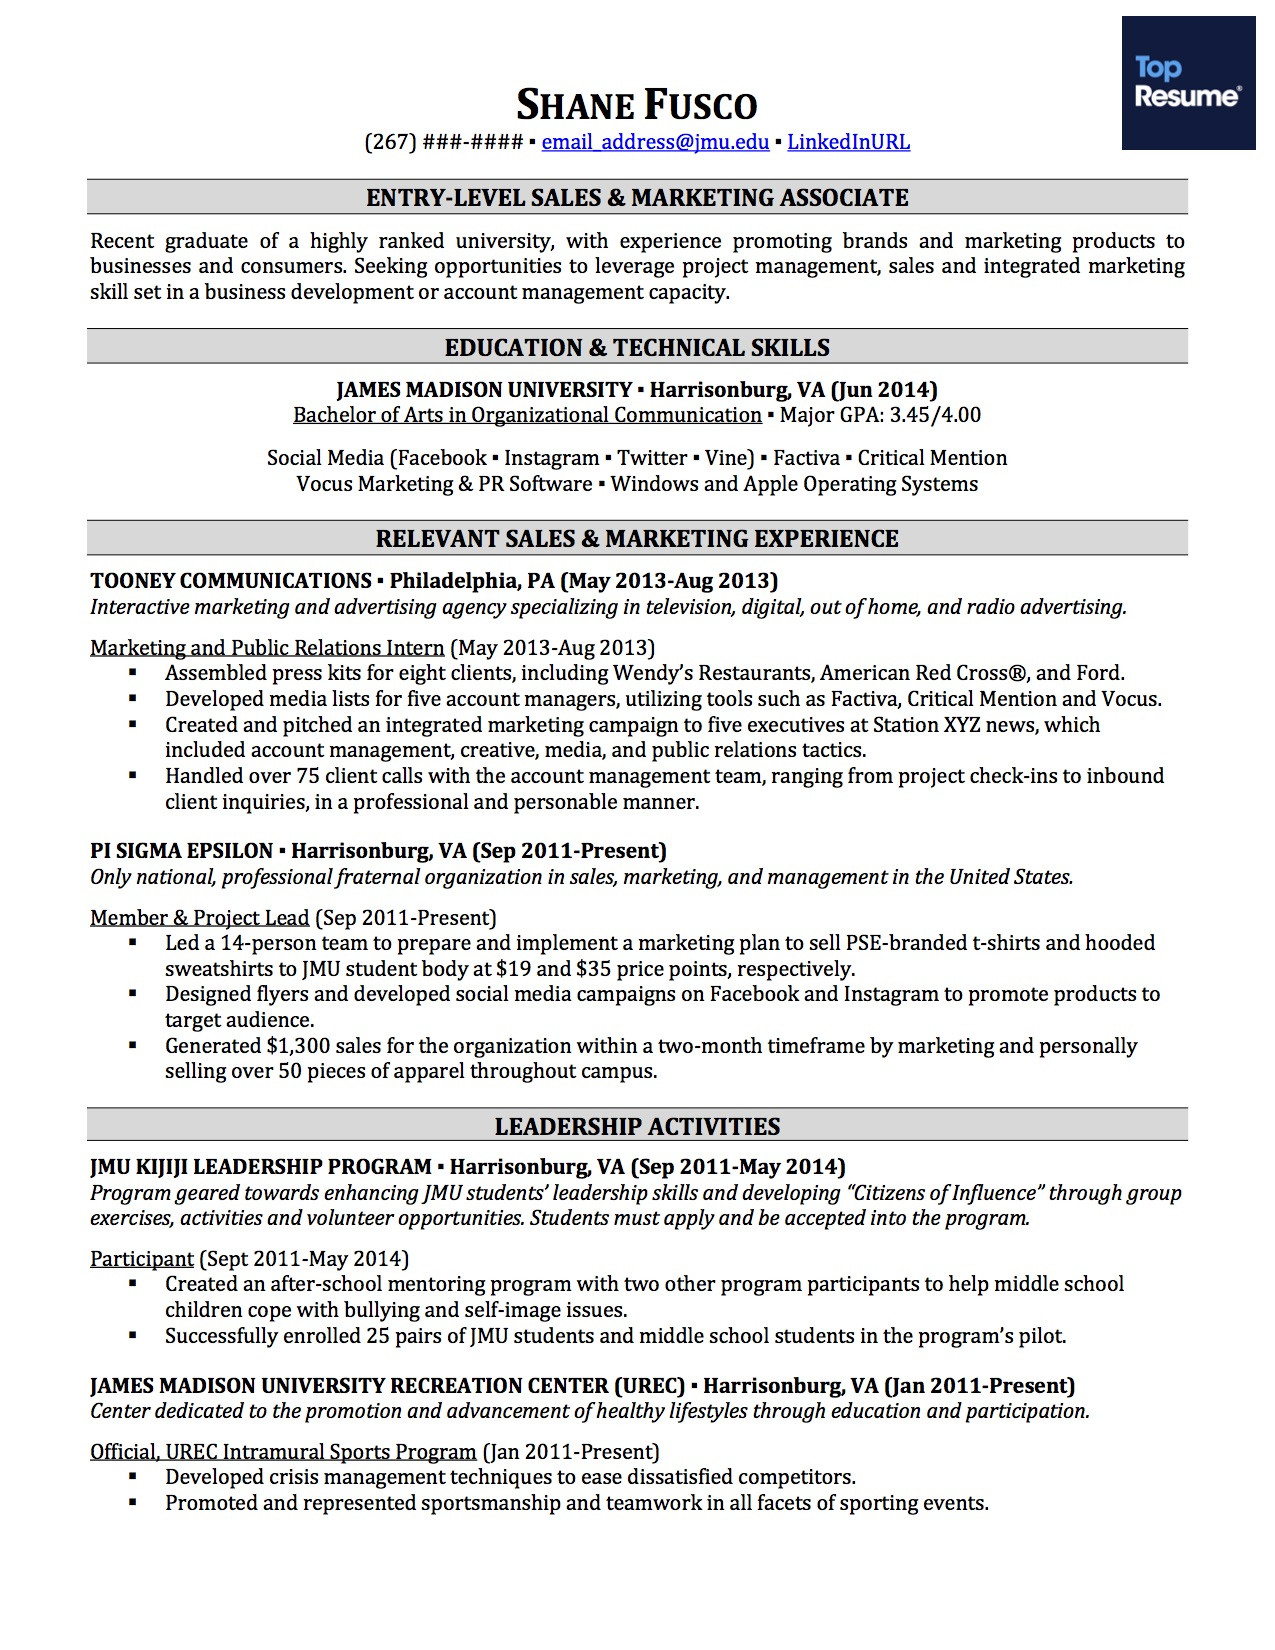 Sample Resume for Minimum Wage Jobs How to Make A Great Resume with No Experience topresume